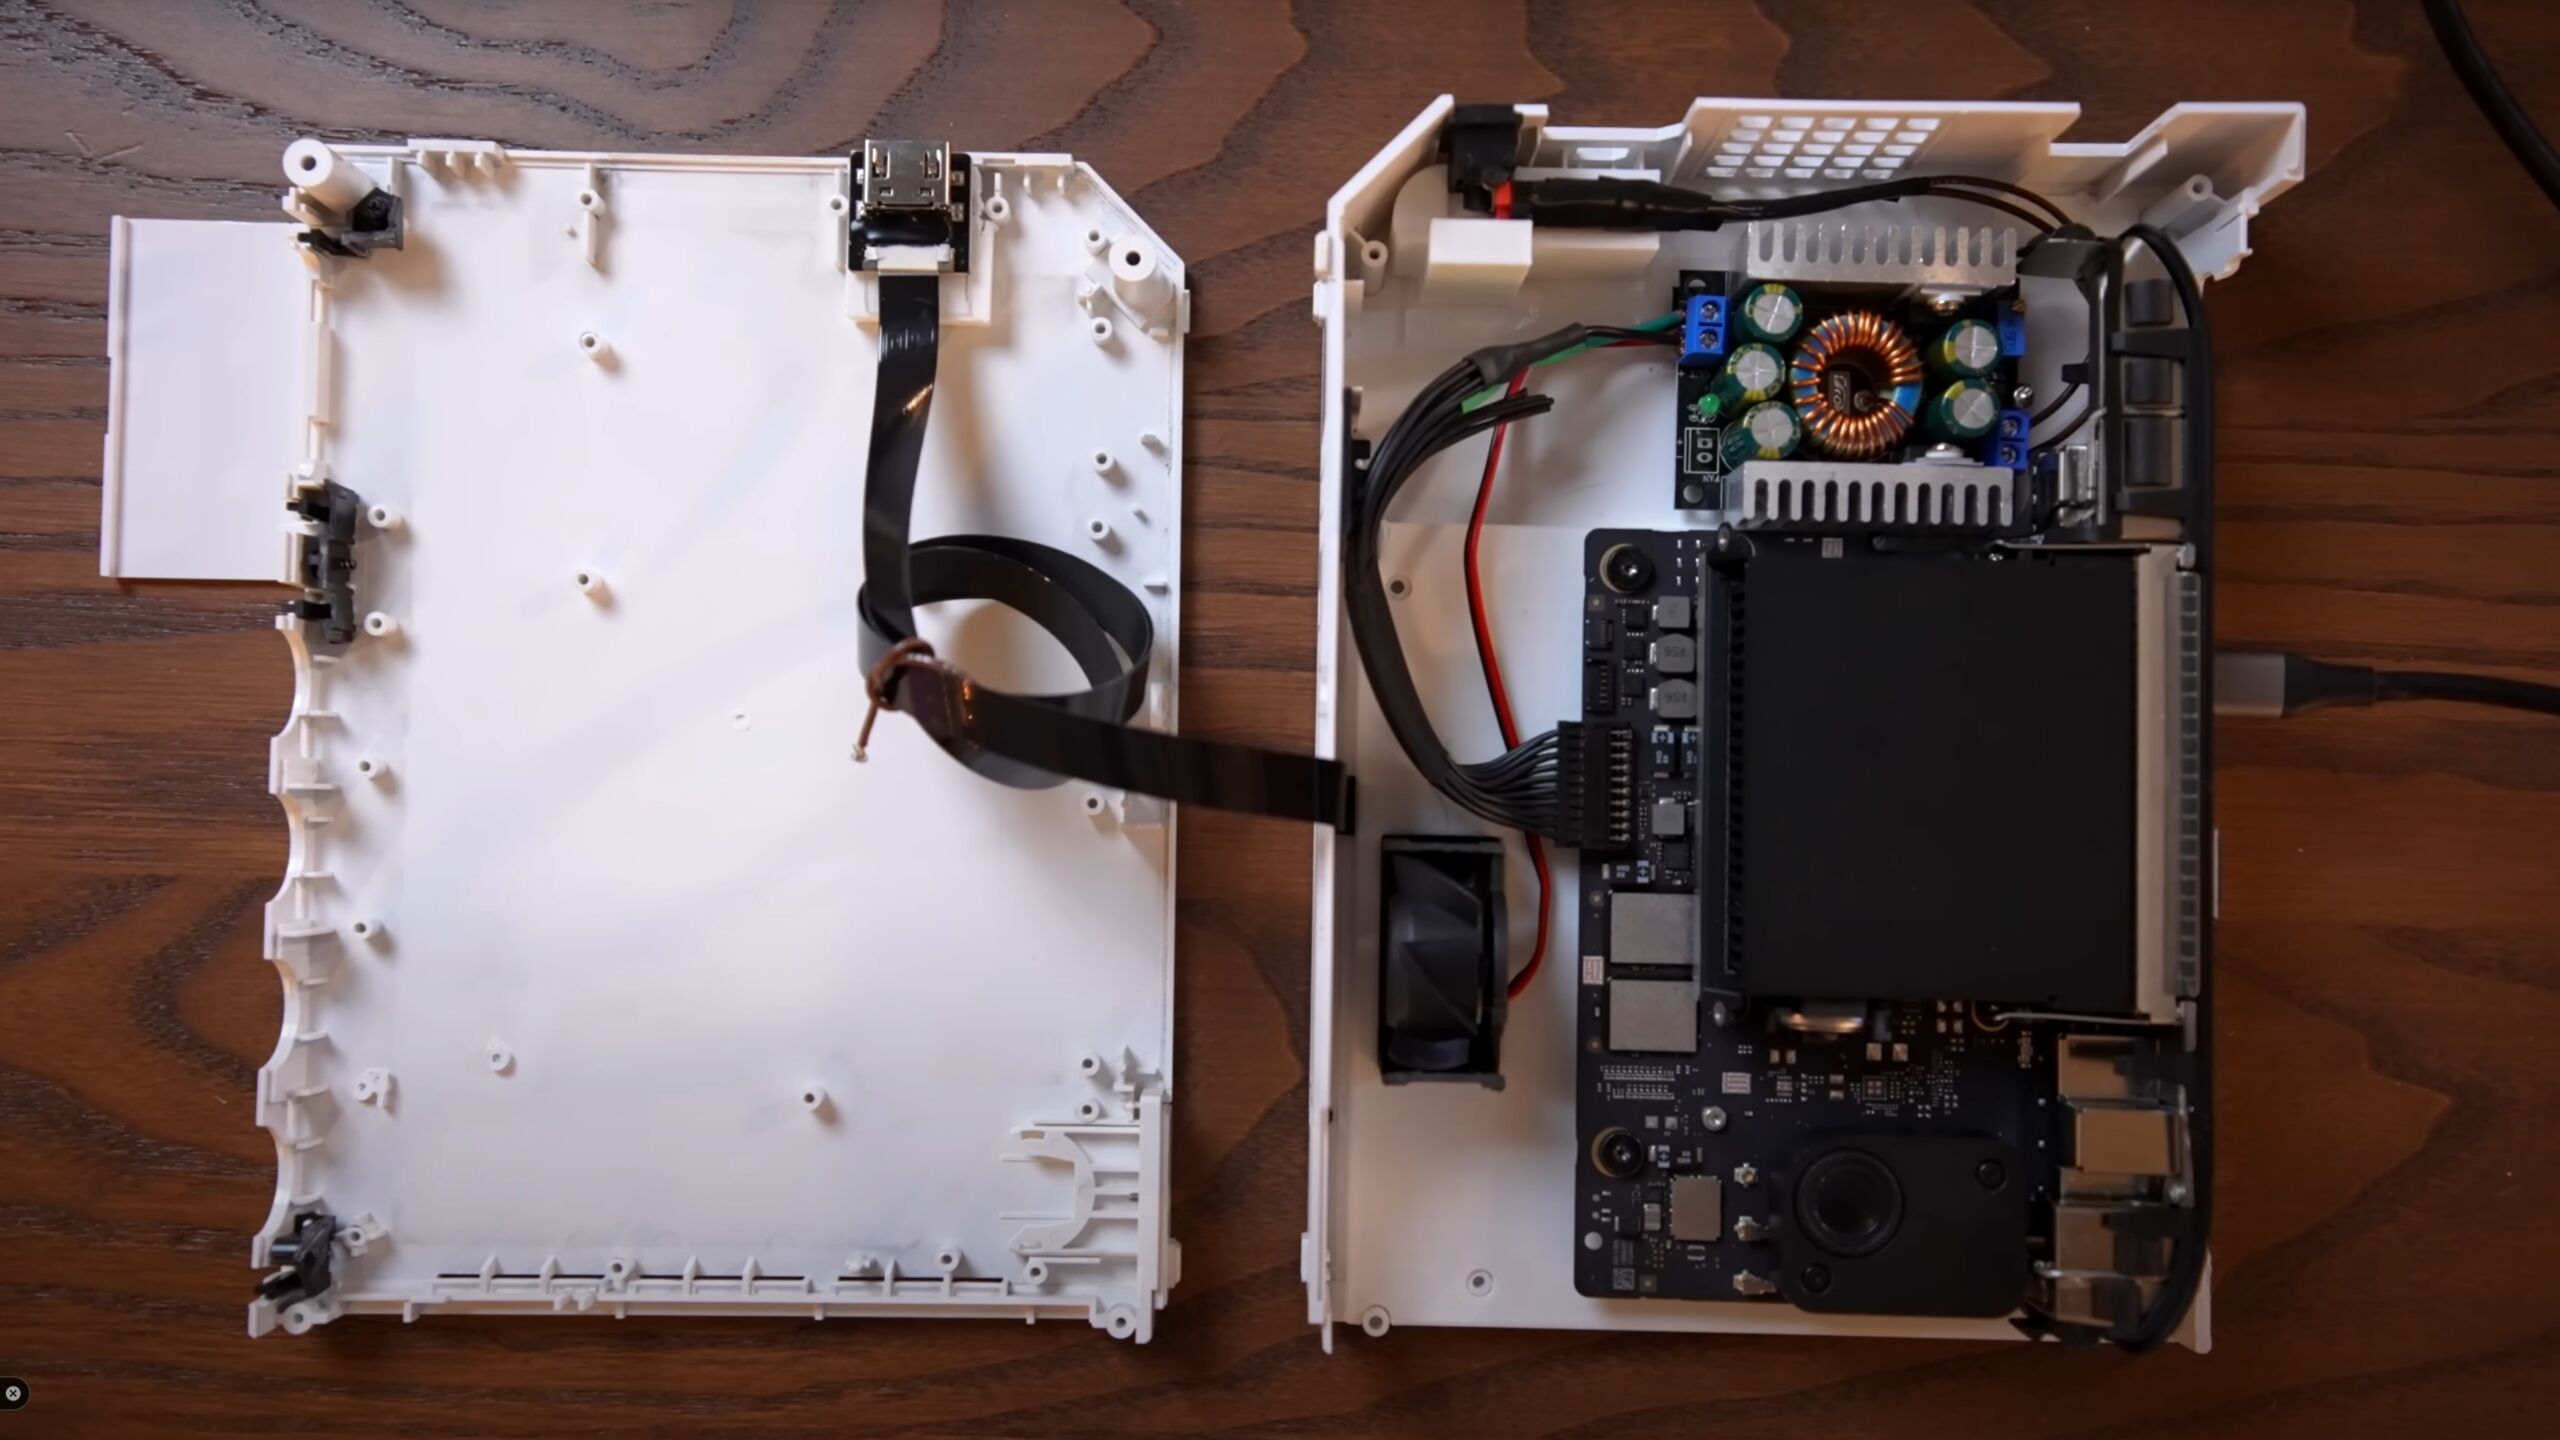 Majestueus Dubbelzinnig briefpapier Modder makes an Apple M1-powered Wii for retro gaming | Ars Technica